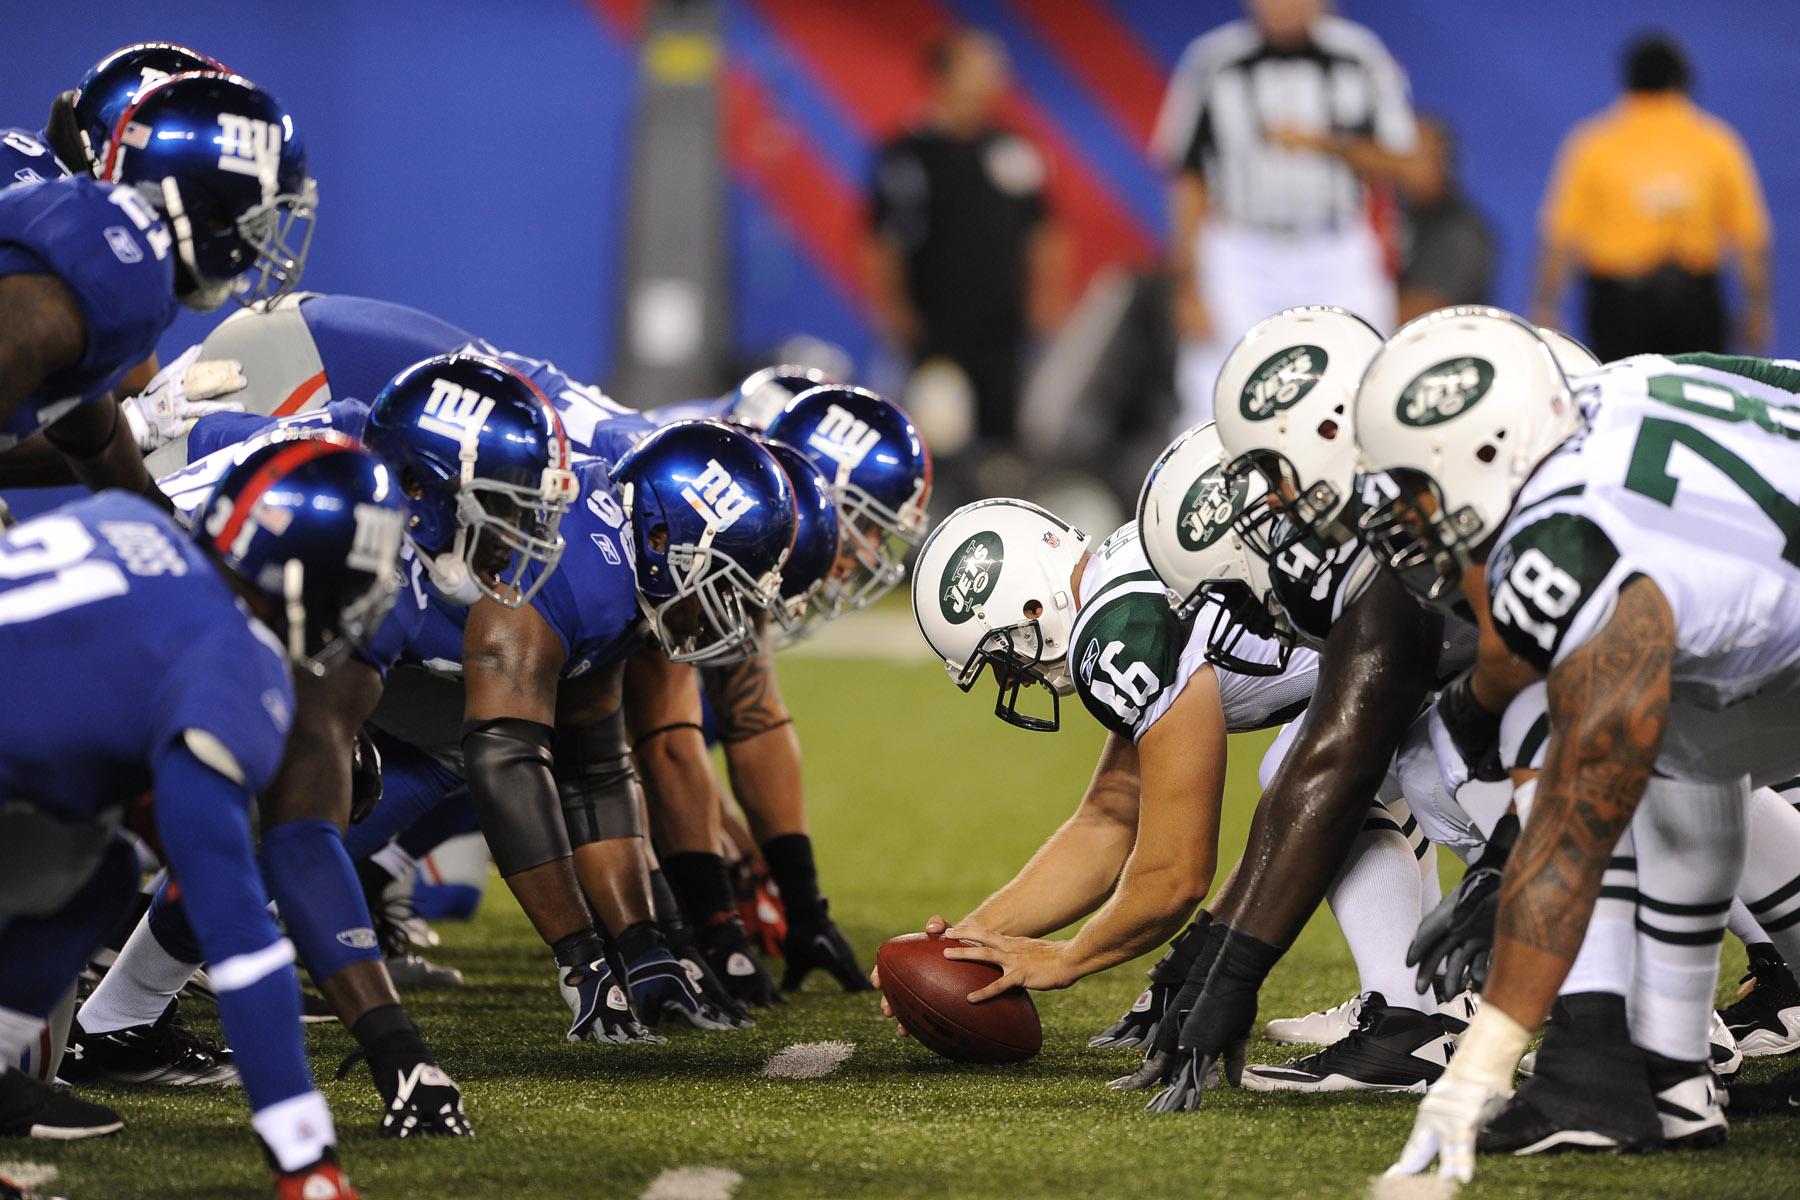 New York Giants,  at MetLife Stadium in East Rutherford, New Jersey